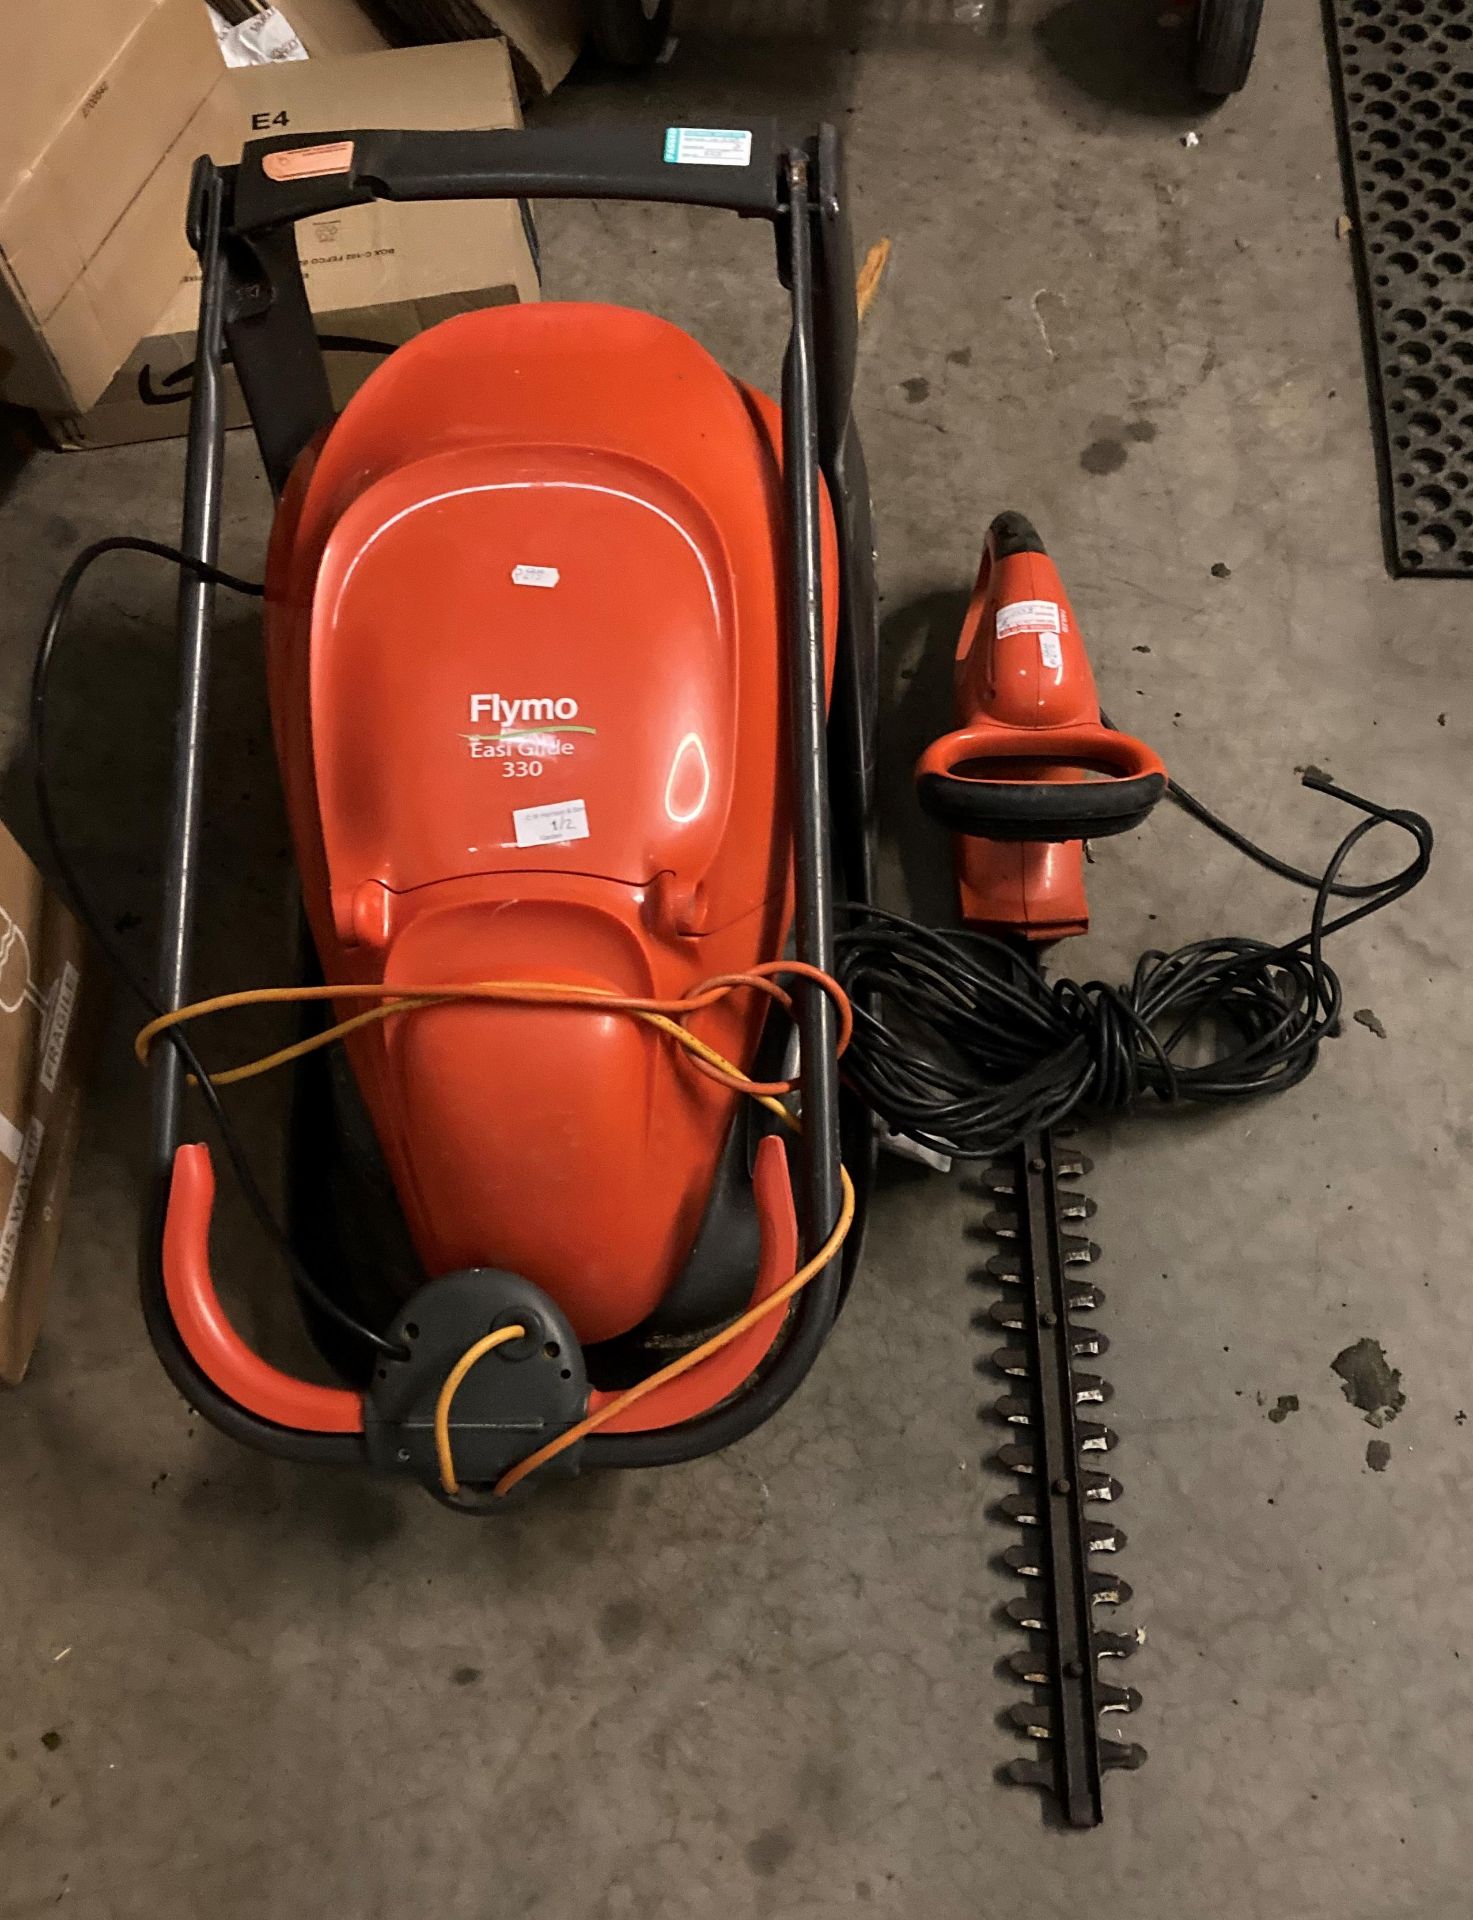 A Flymo Easi Glide 350, 240v hover mower complete with collection box and a Flymo 450,